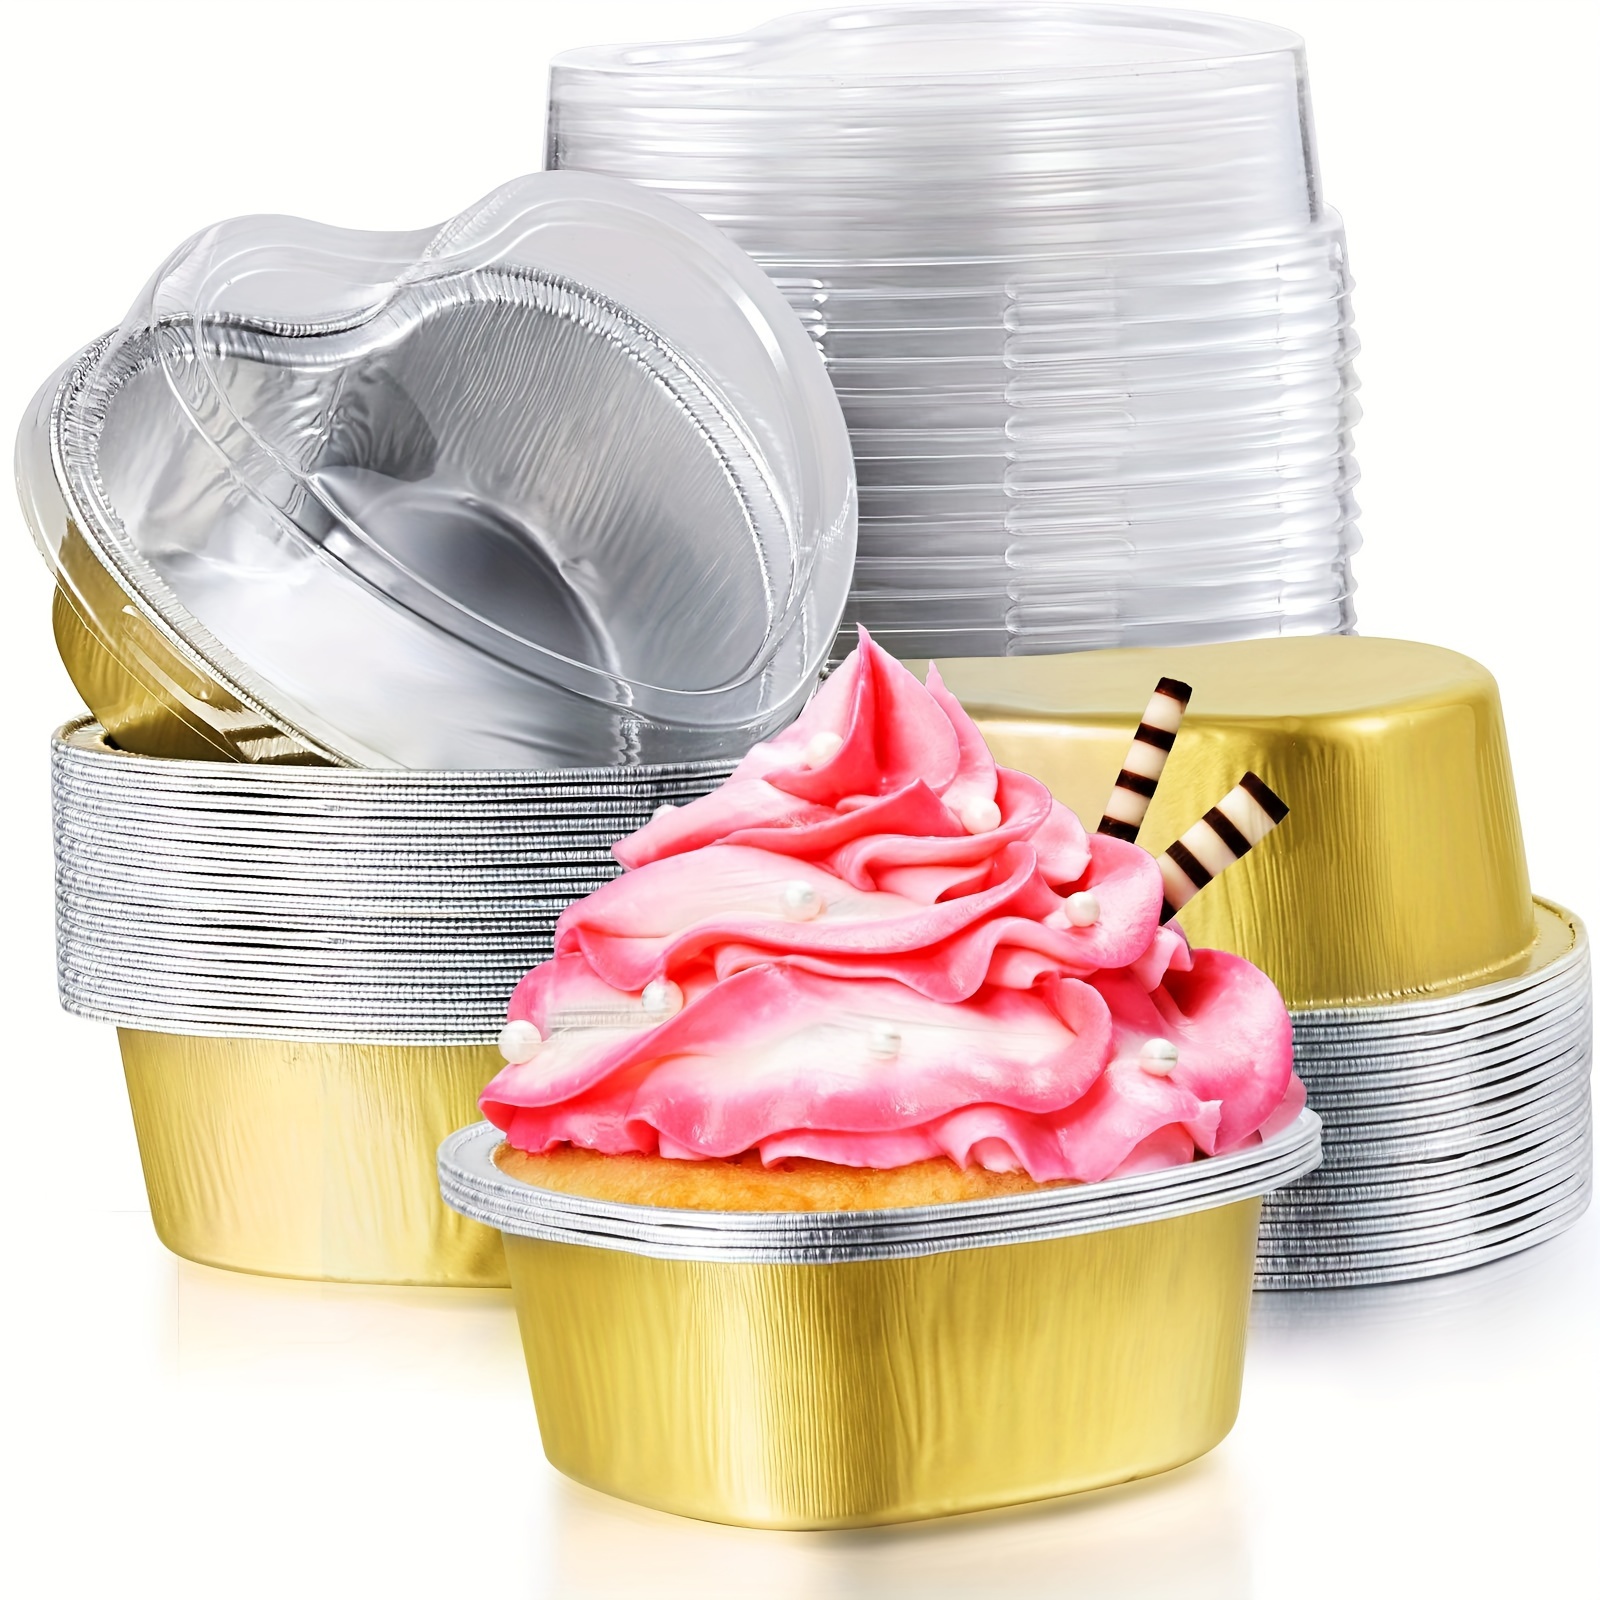 100pcs Paper Cupcake Cup 2.5oz Standard Muffin Baking Cups Liners